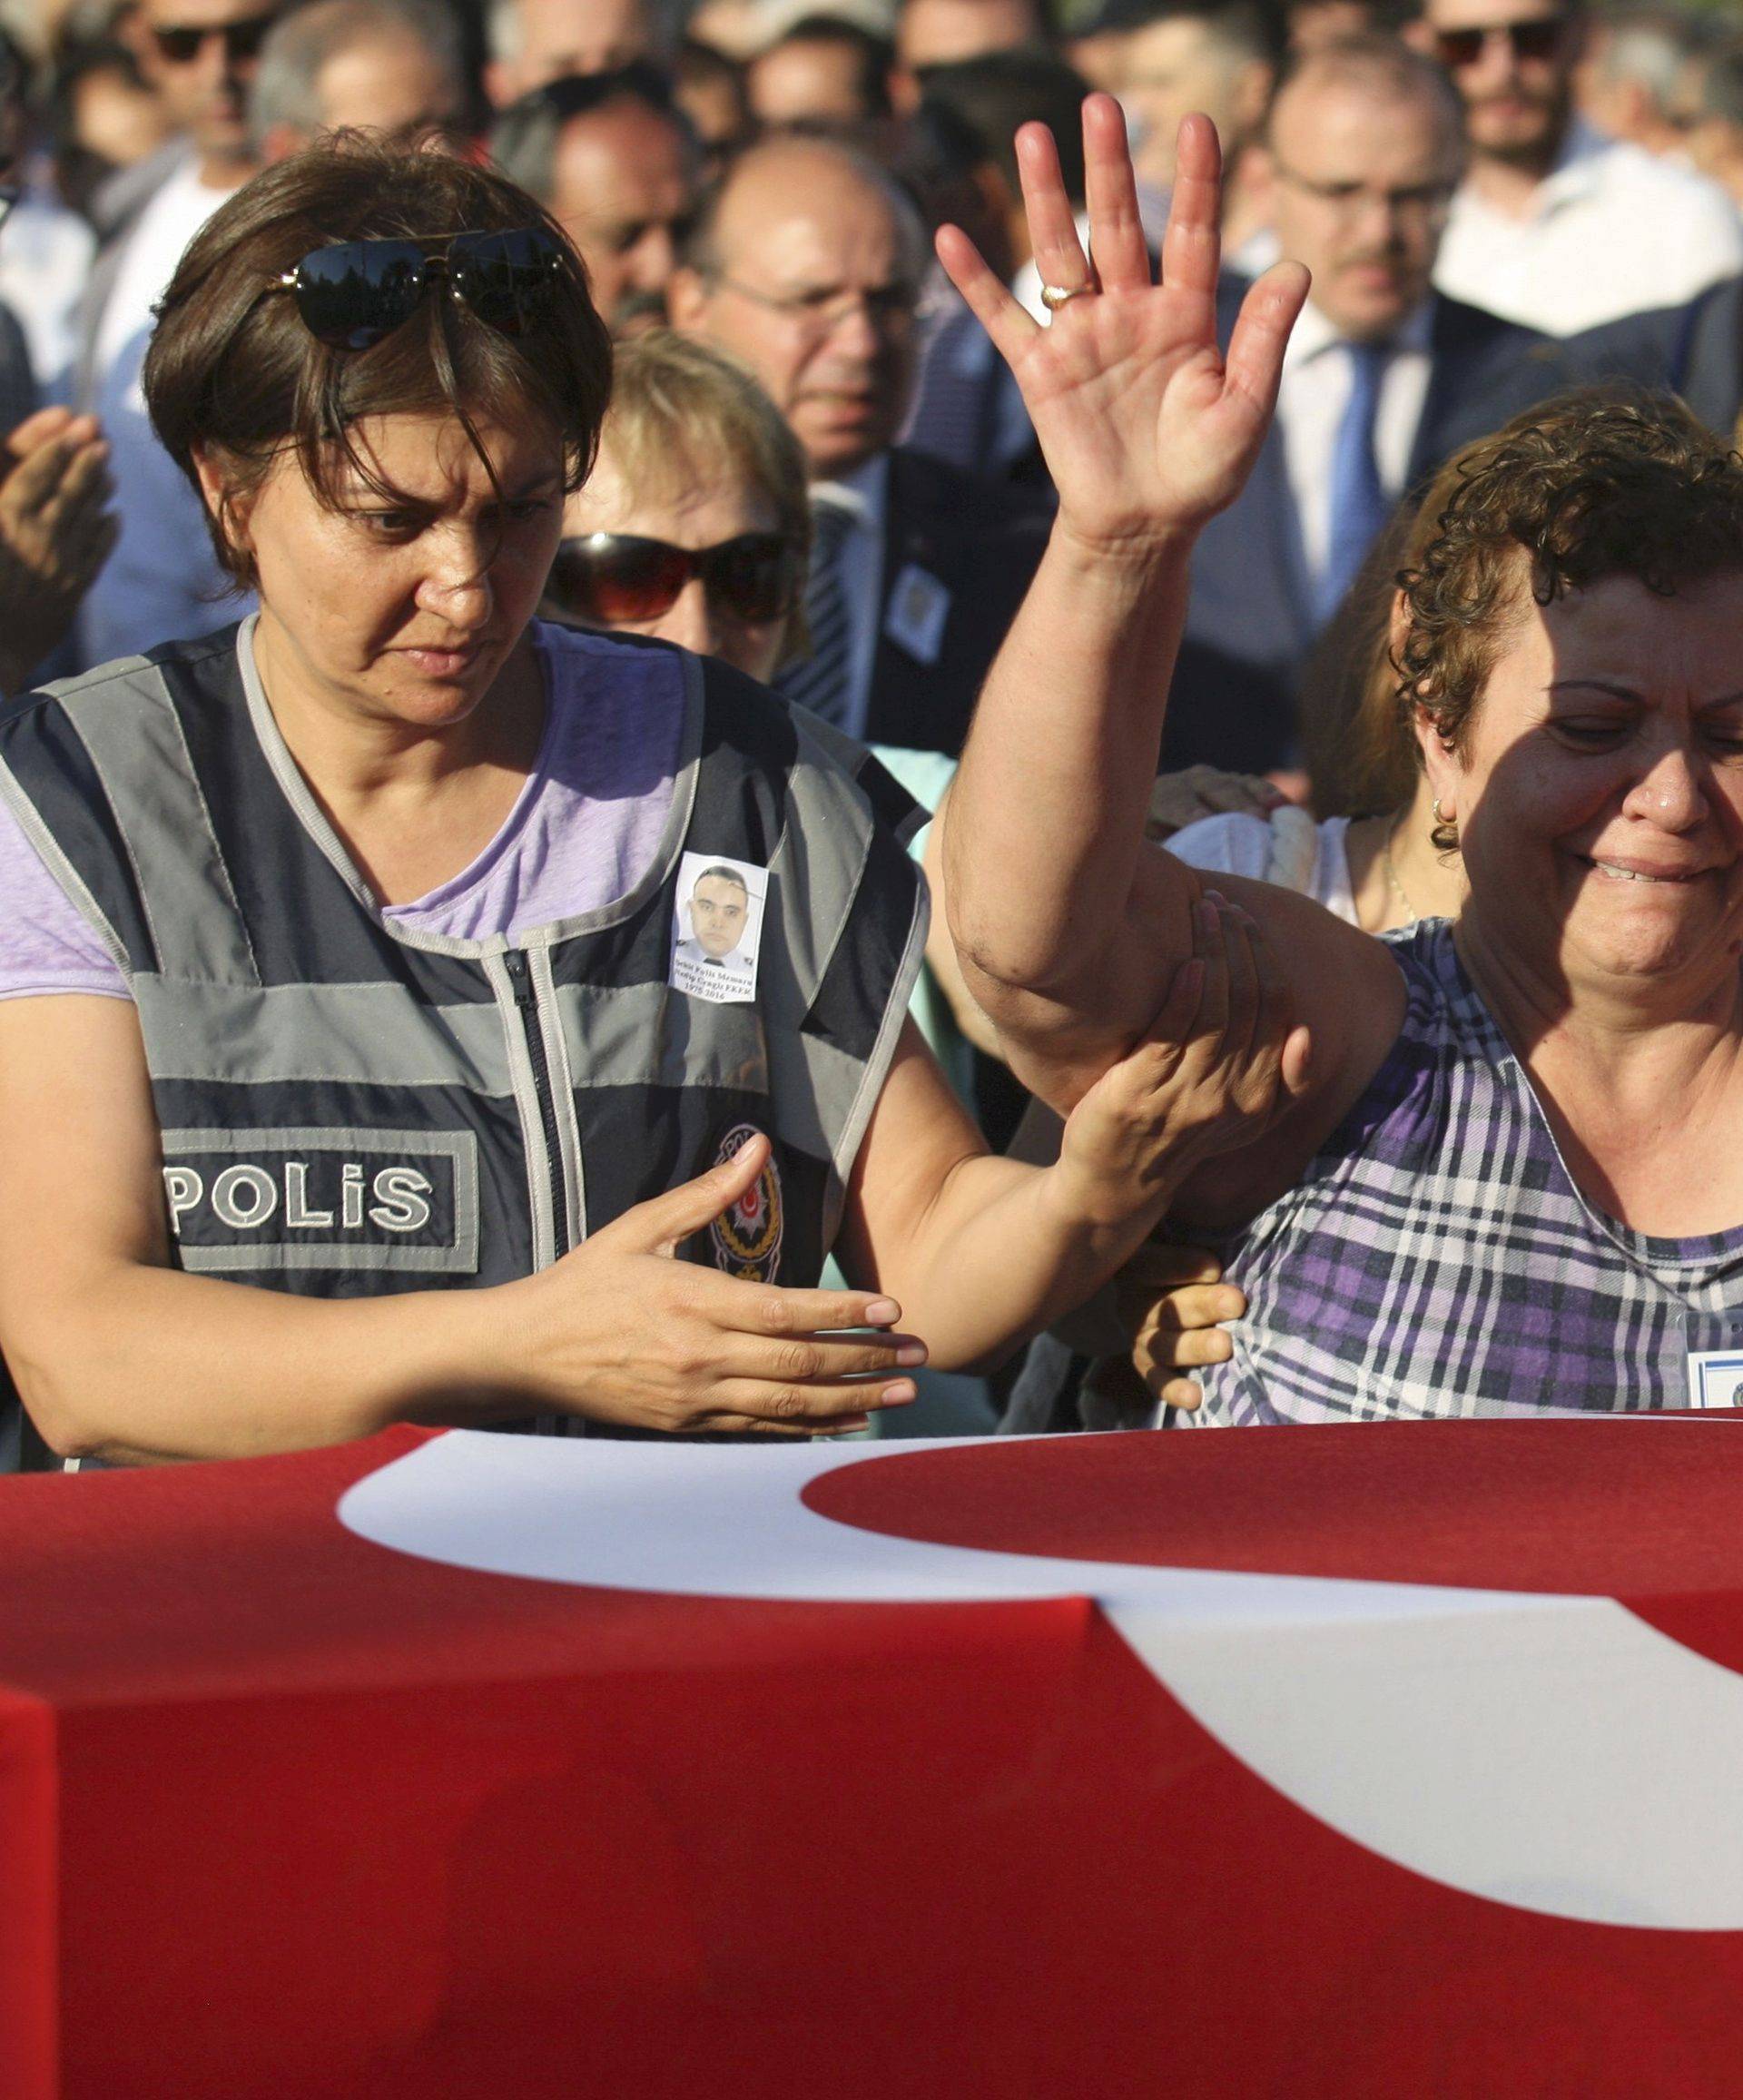 Women mourn over the coffin holding body of police officer Nedip Cengiz Eker during a funeral ceremony in Marmaris